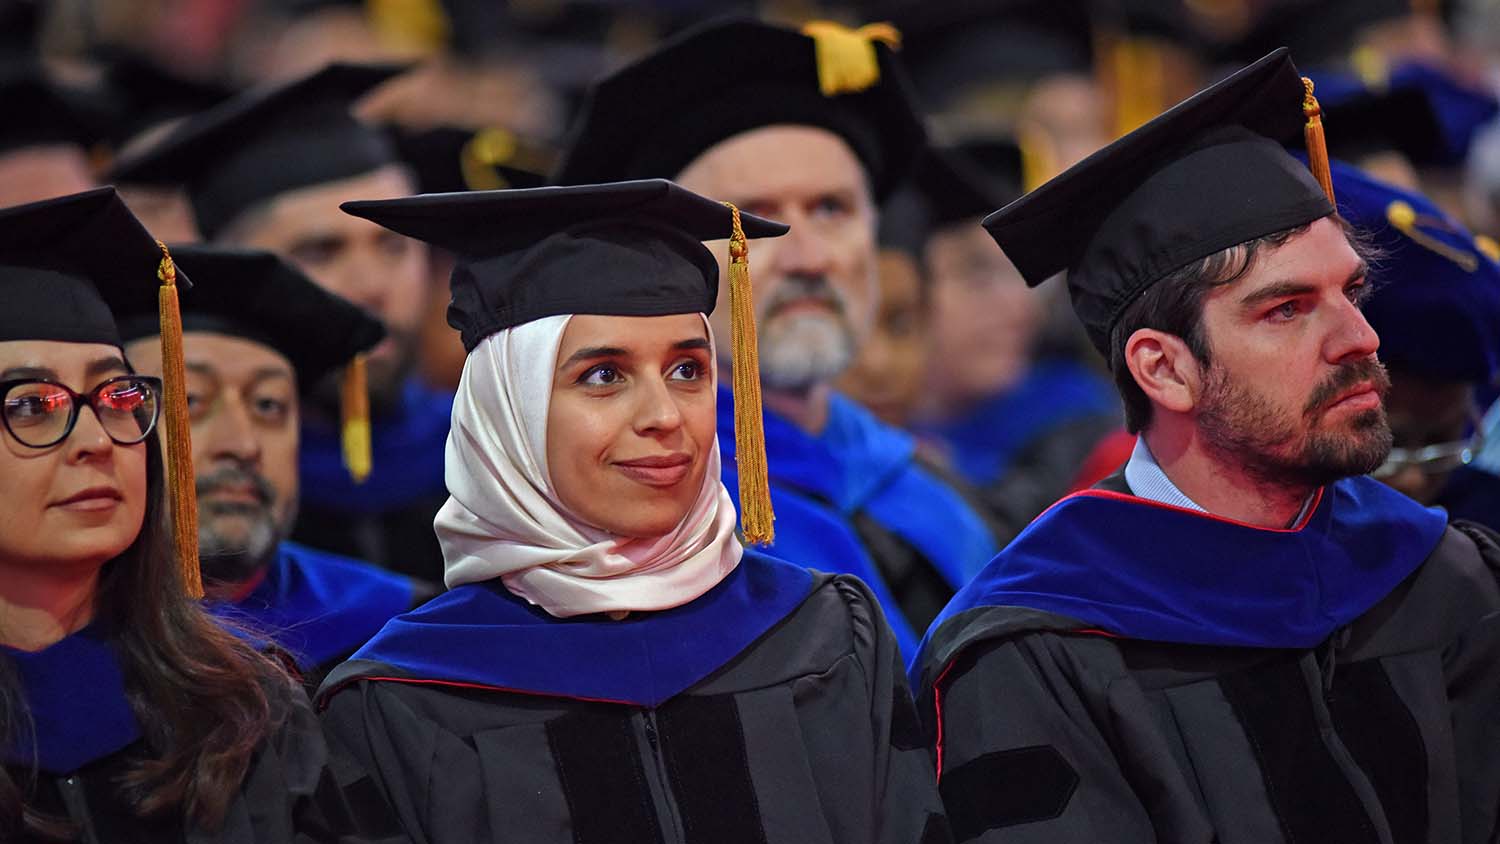 Graduate students listen to the speaker during the Spring 2019 commencement ceremony